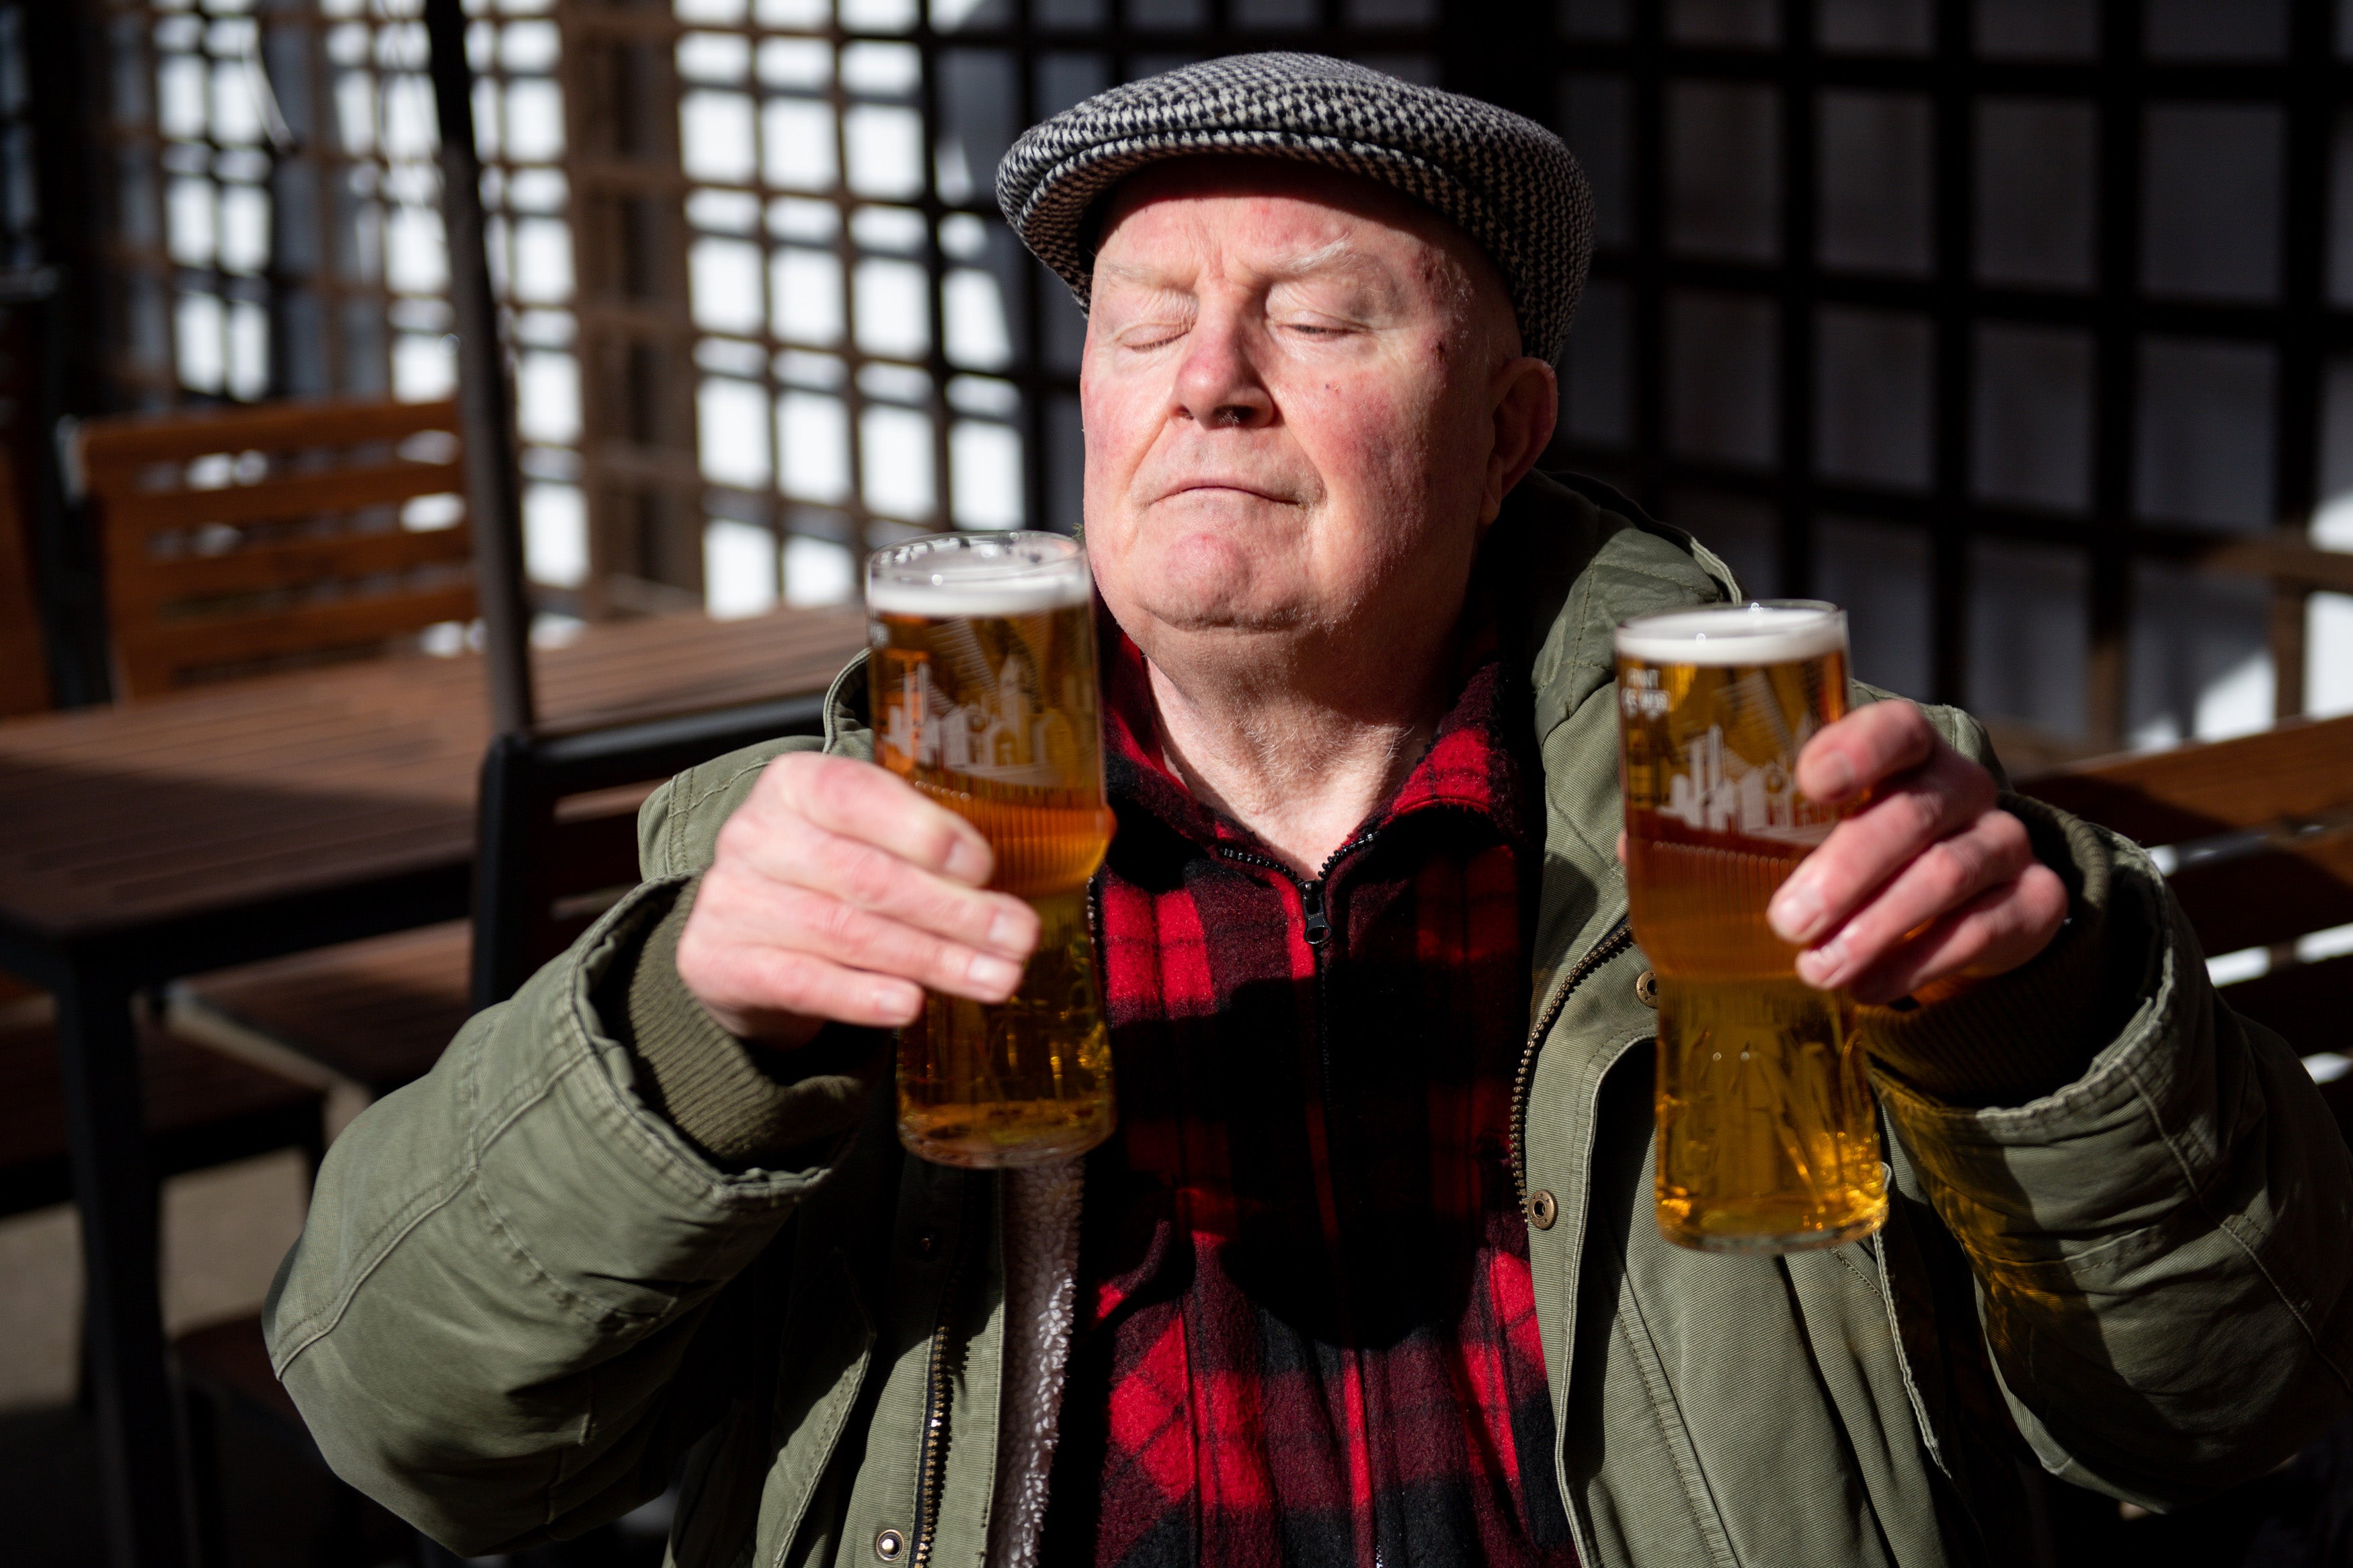 John Witts enjoys a drink at the reopening of the Figure of Eight pub in Birmingham (Jacob King/PA)